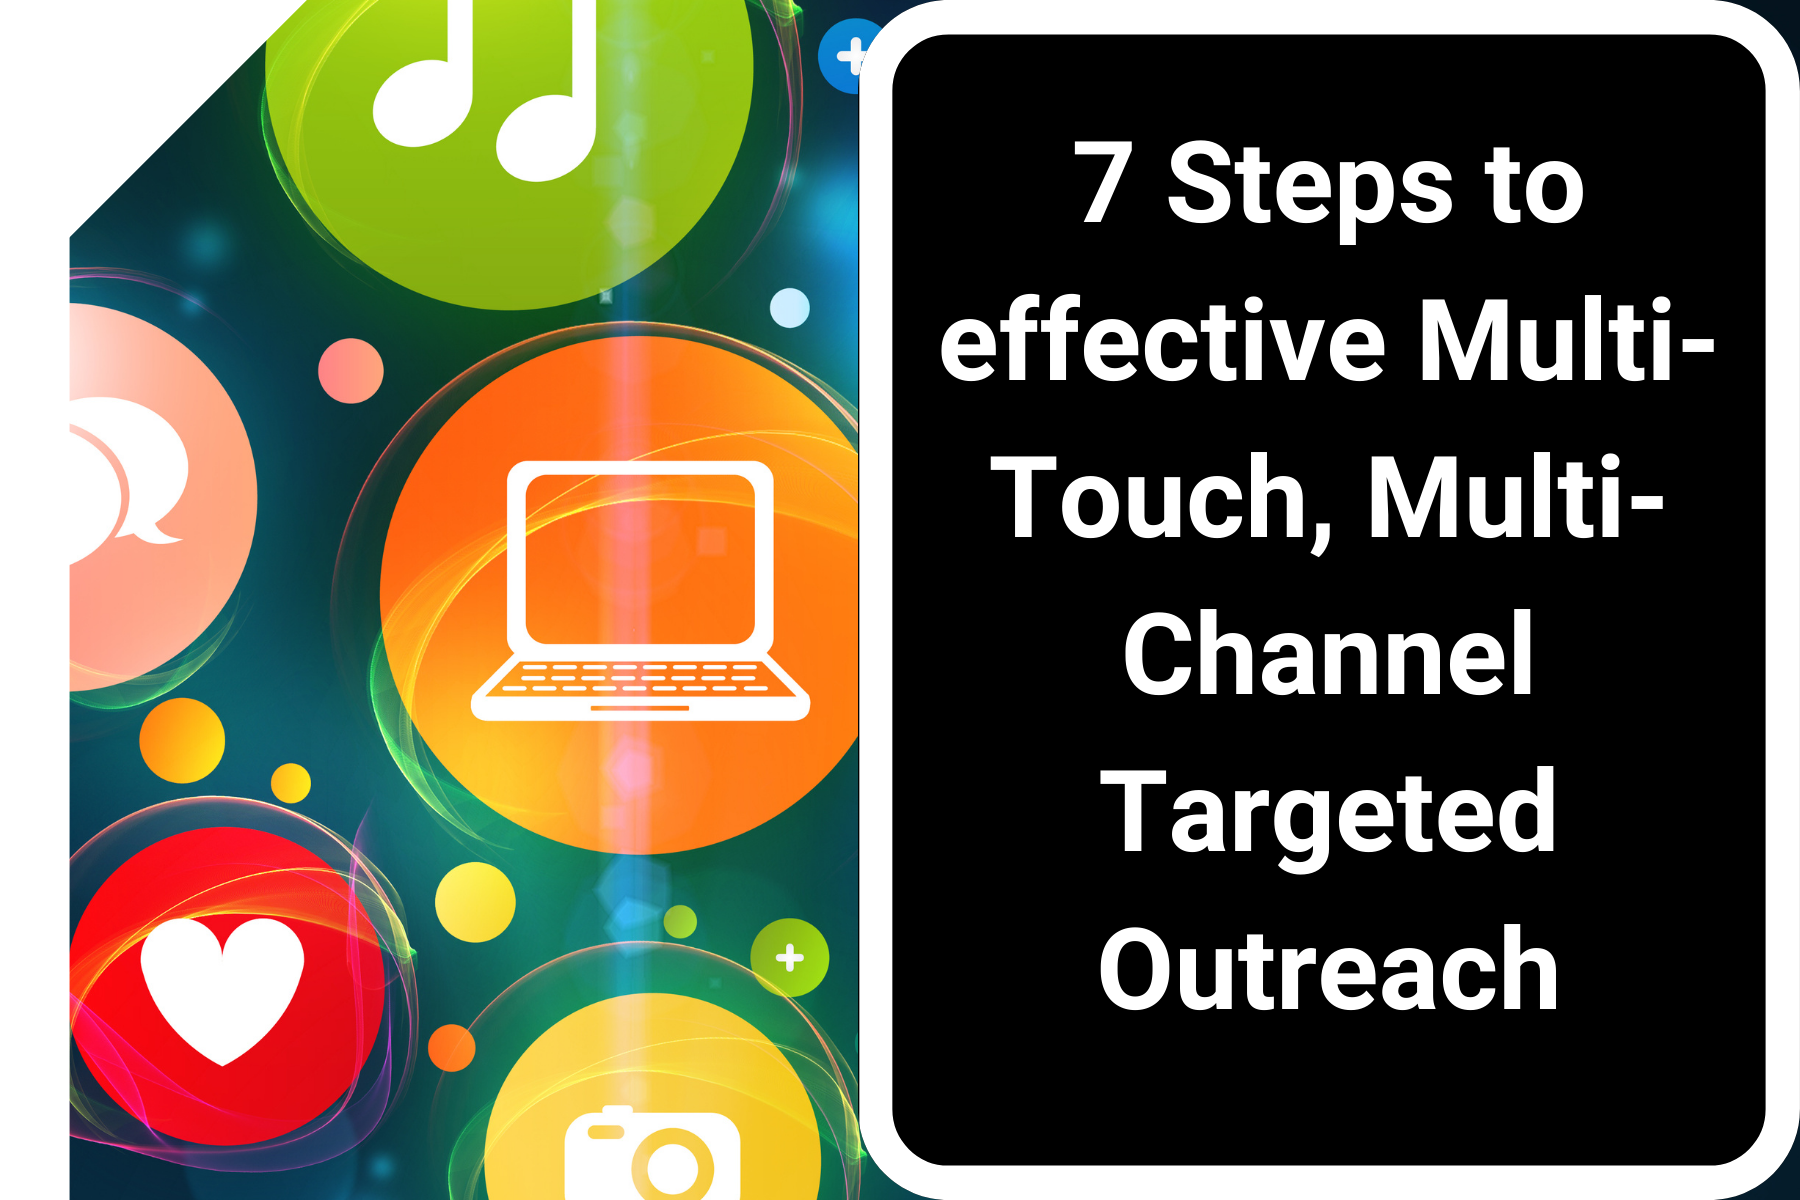 7 Steps to effective Multi-Touch, Multi-Channel Targeted Outreach